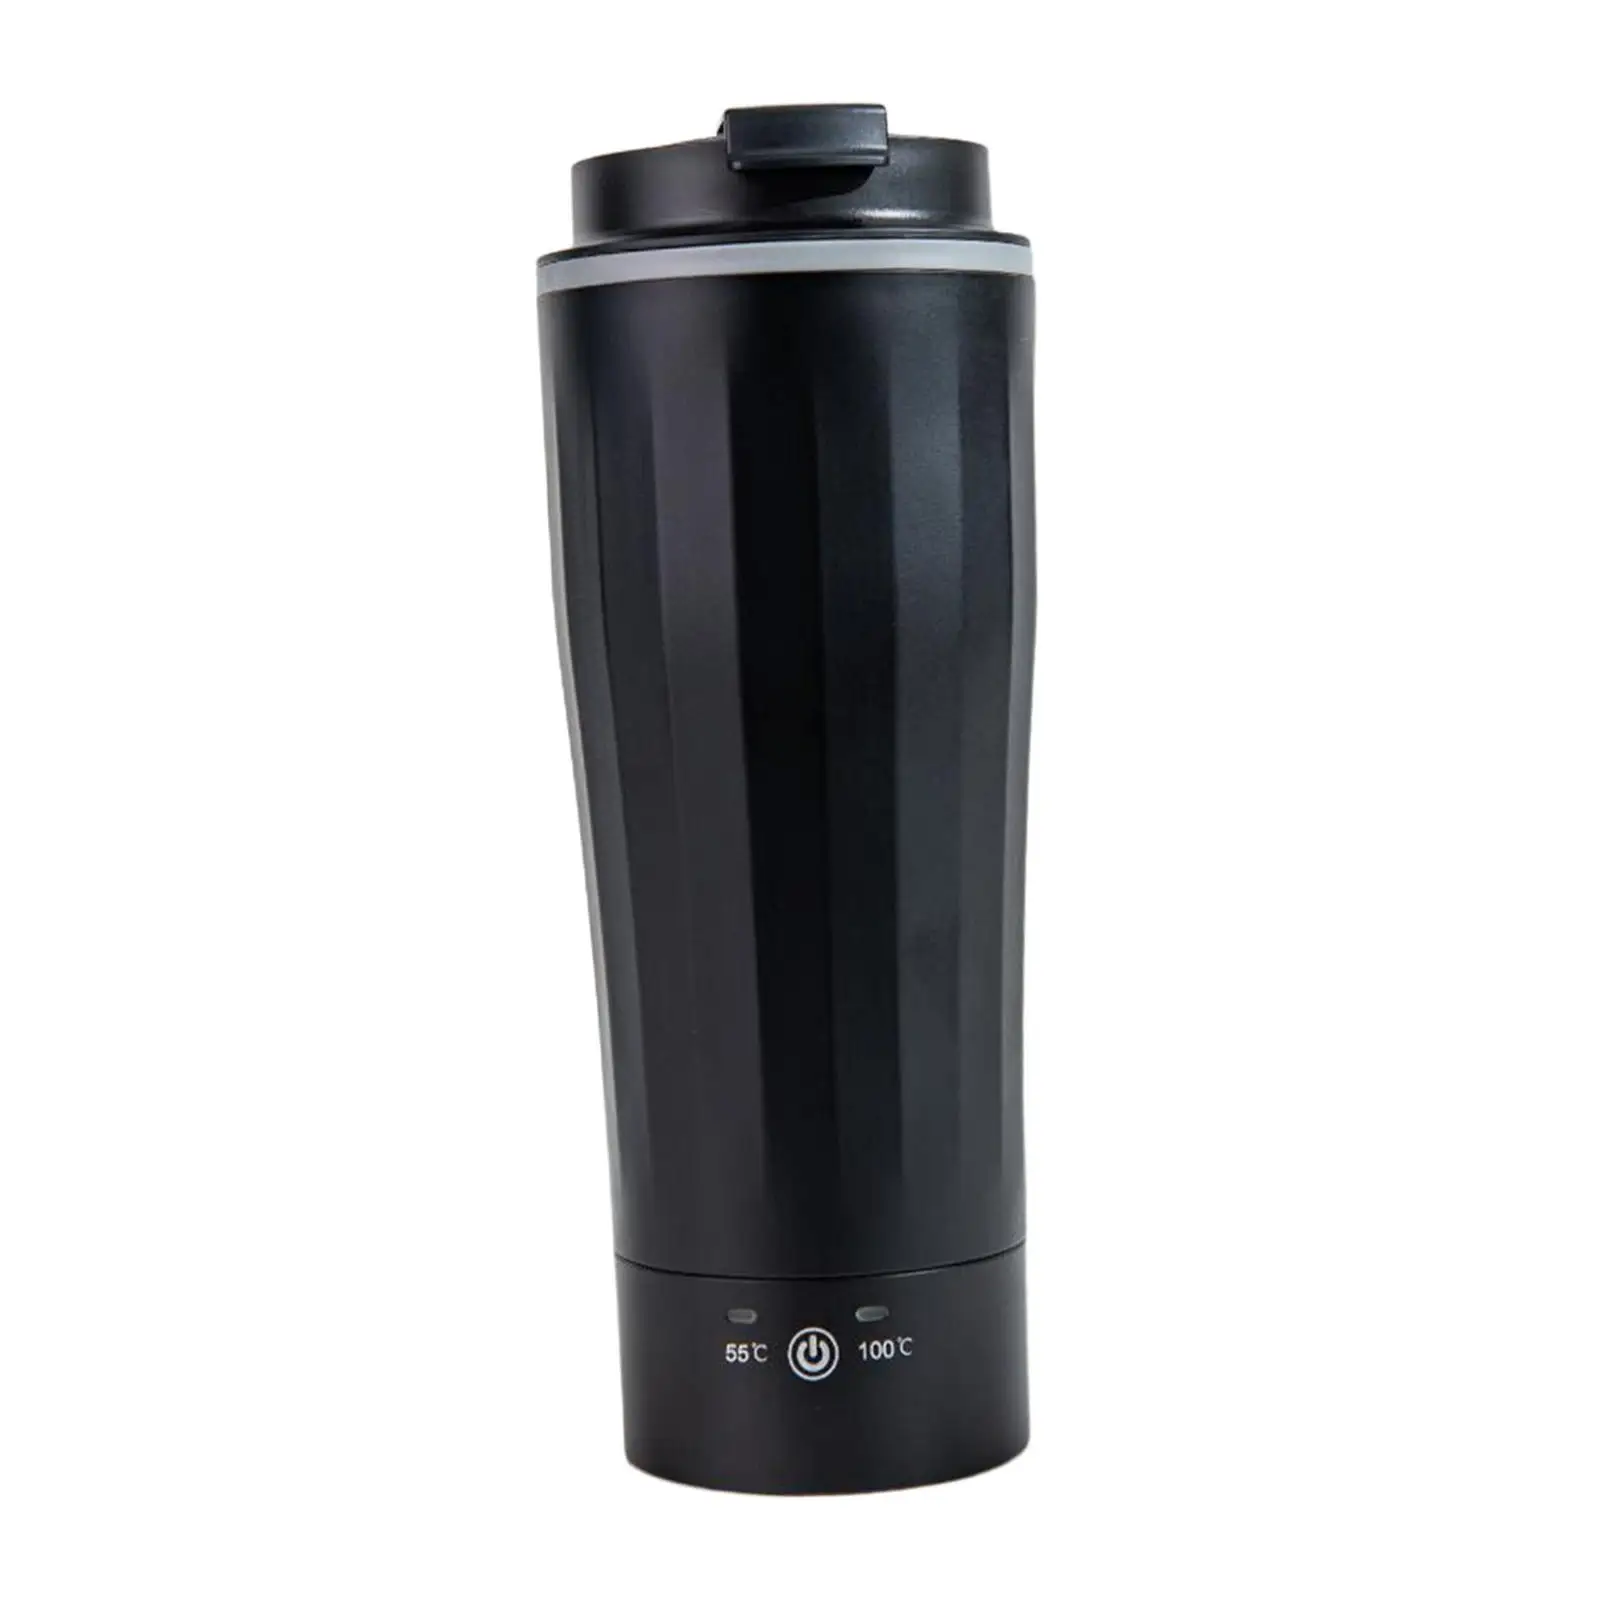 Car Heating Cup Portable Kettle 500ml Travel Mug Car Electric Kettle for Milk Heated Brewing Coffee Heating Water Outdoor